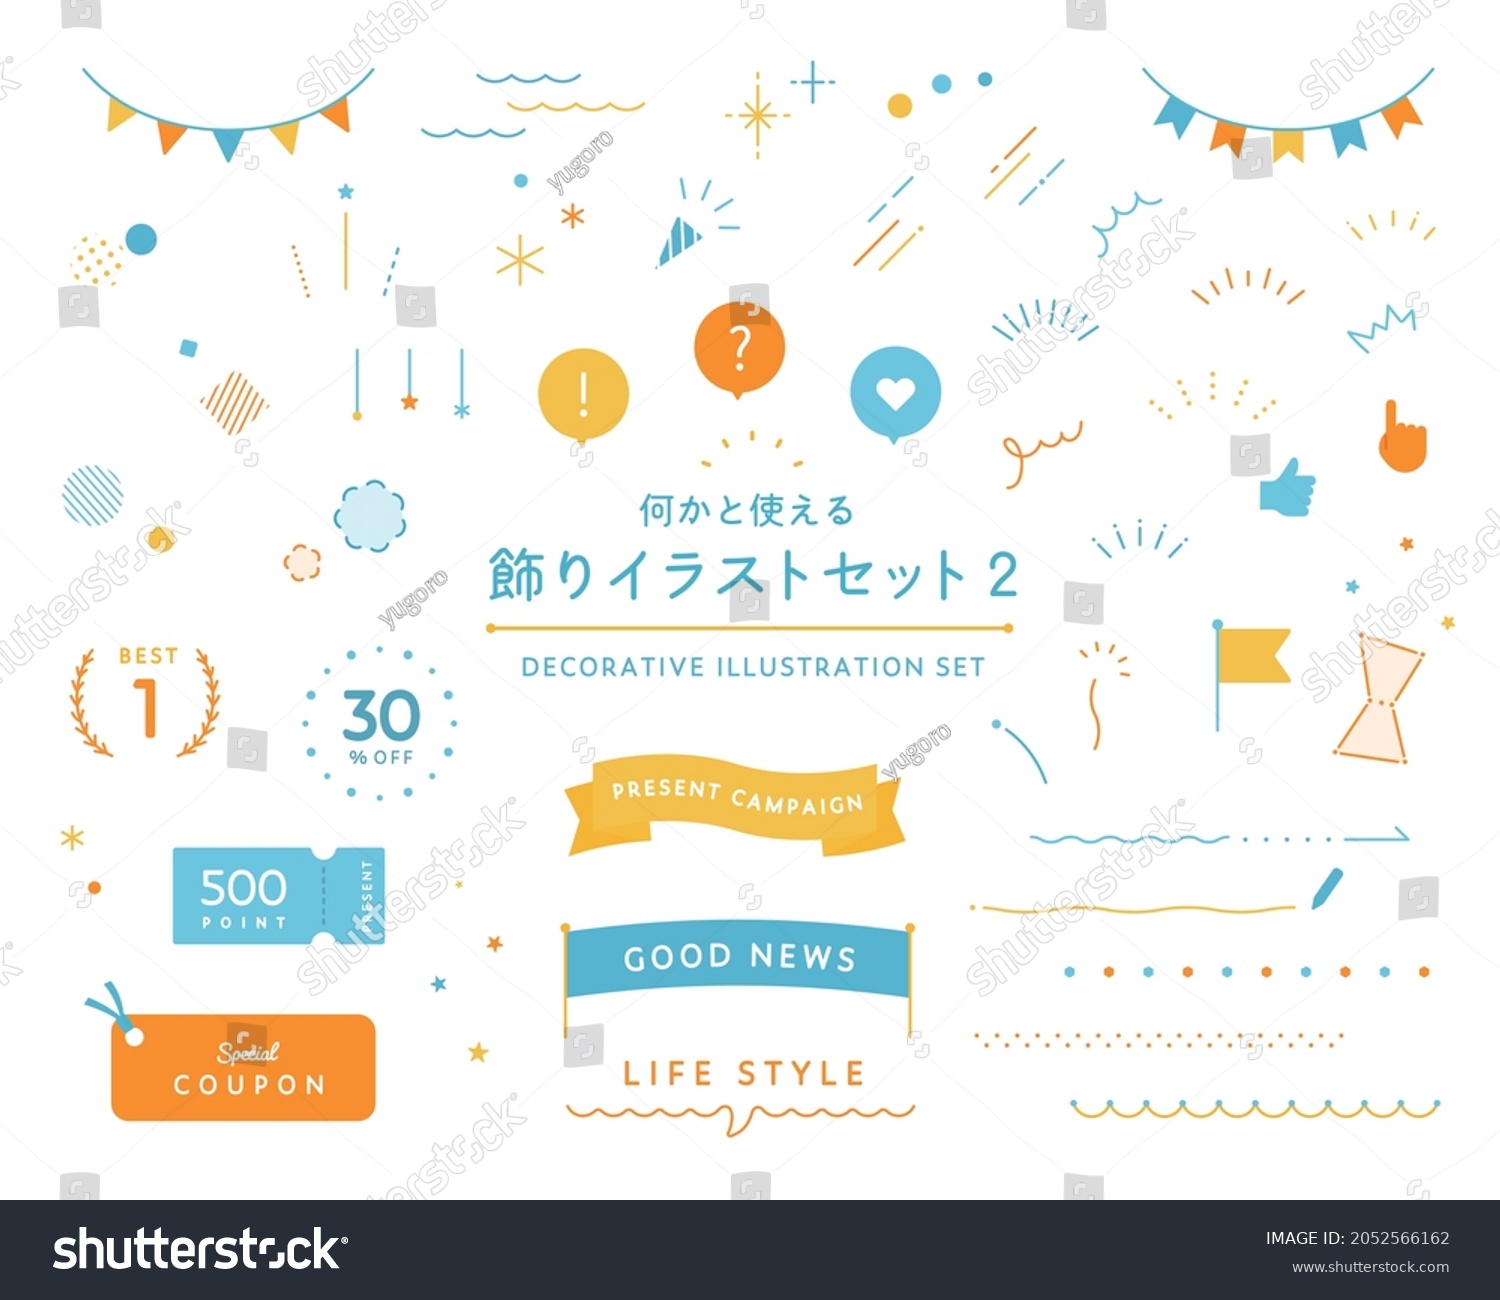 stock-vector-a-set-of-illustrations-and-icons-of-decorations-japanese-means-the-same-as-the-english-title-2052566162